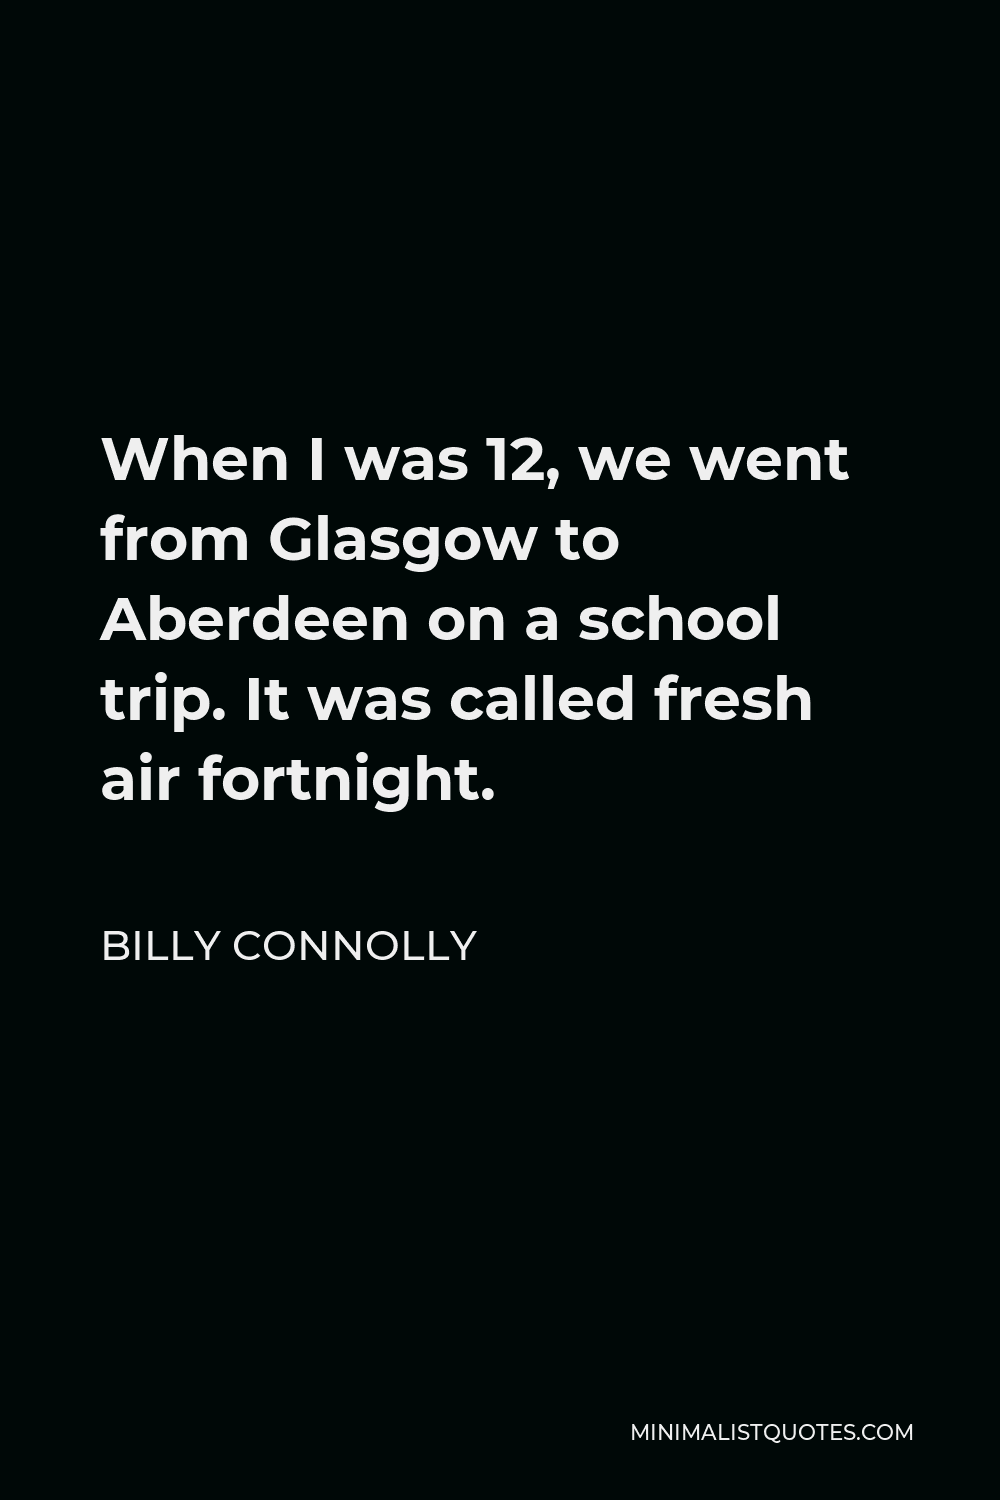 Billy Connolly Quote - When I was 12, we went from Glasgow to Aberdeen on a school trip. It was called fresh air fortnight.